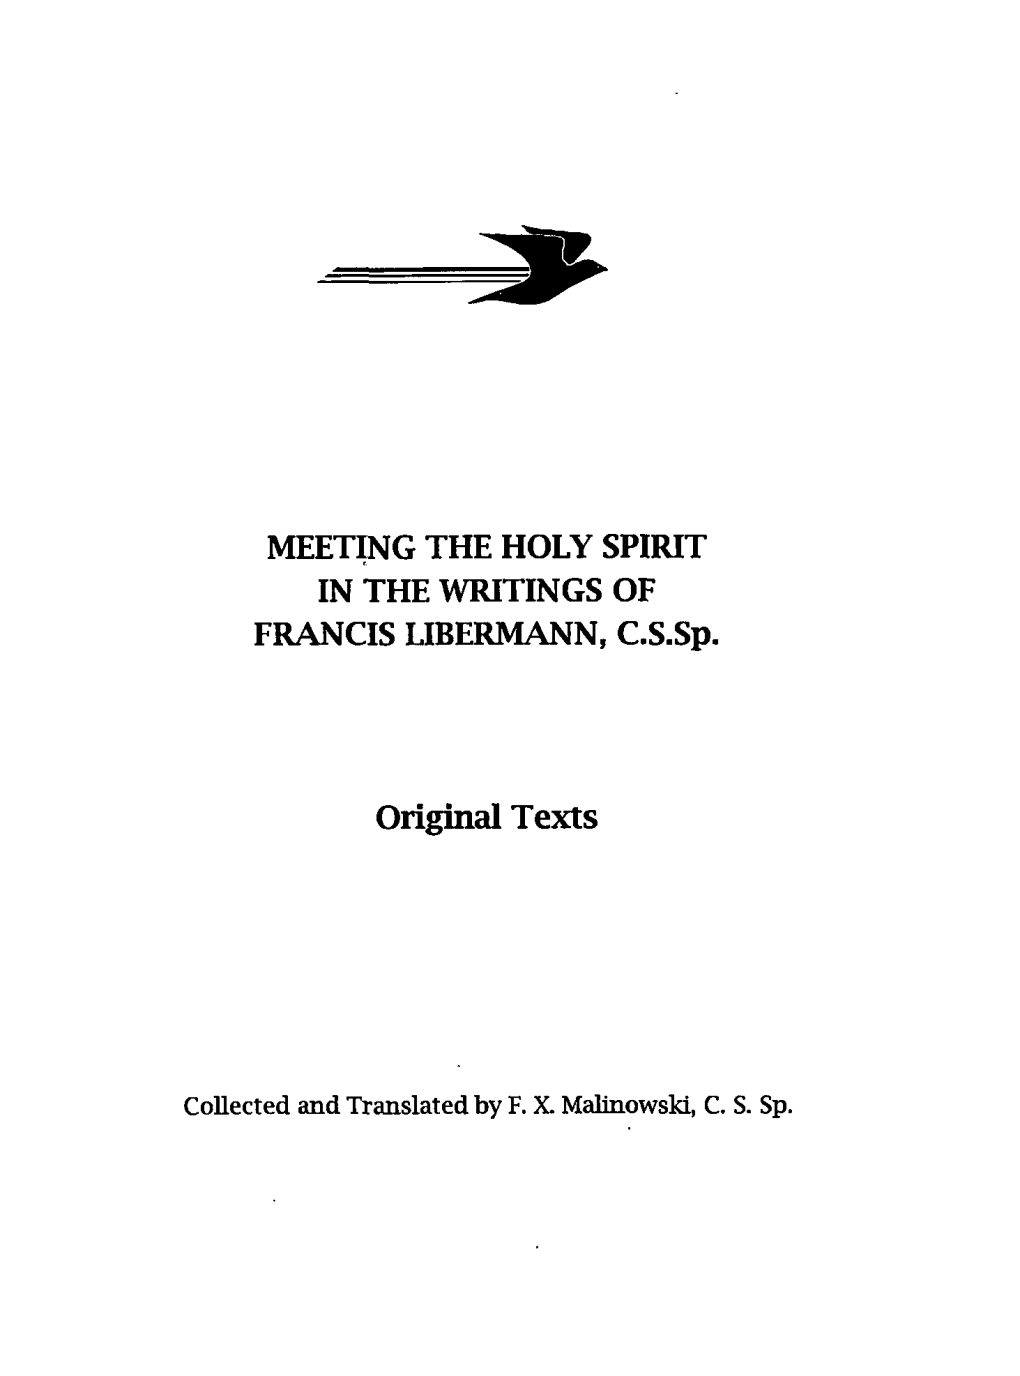 Meeting the Holy Spirit in the Writings of Father Francis Libermann, C.S.Sp